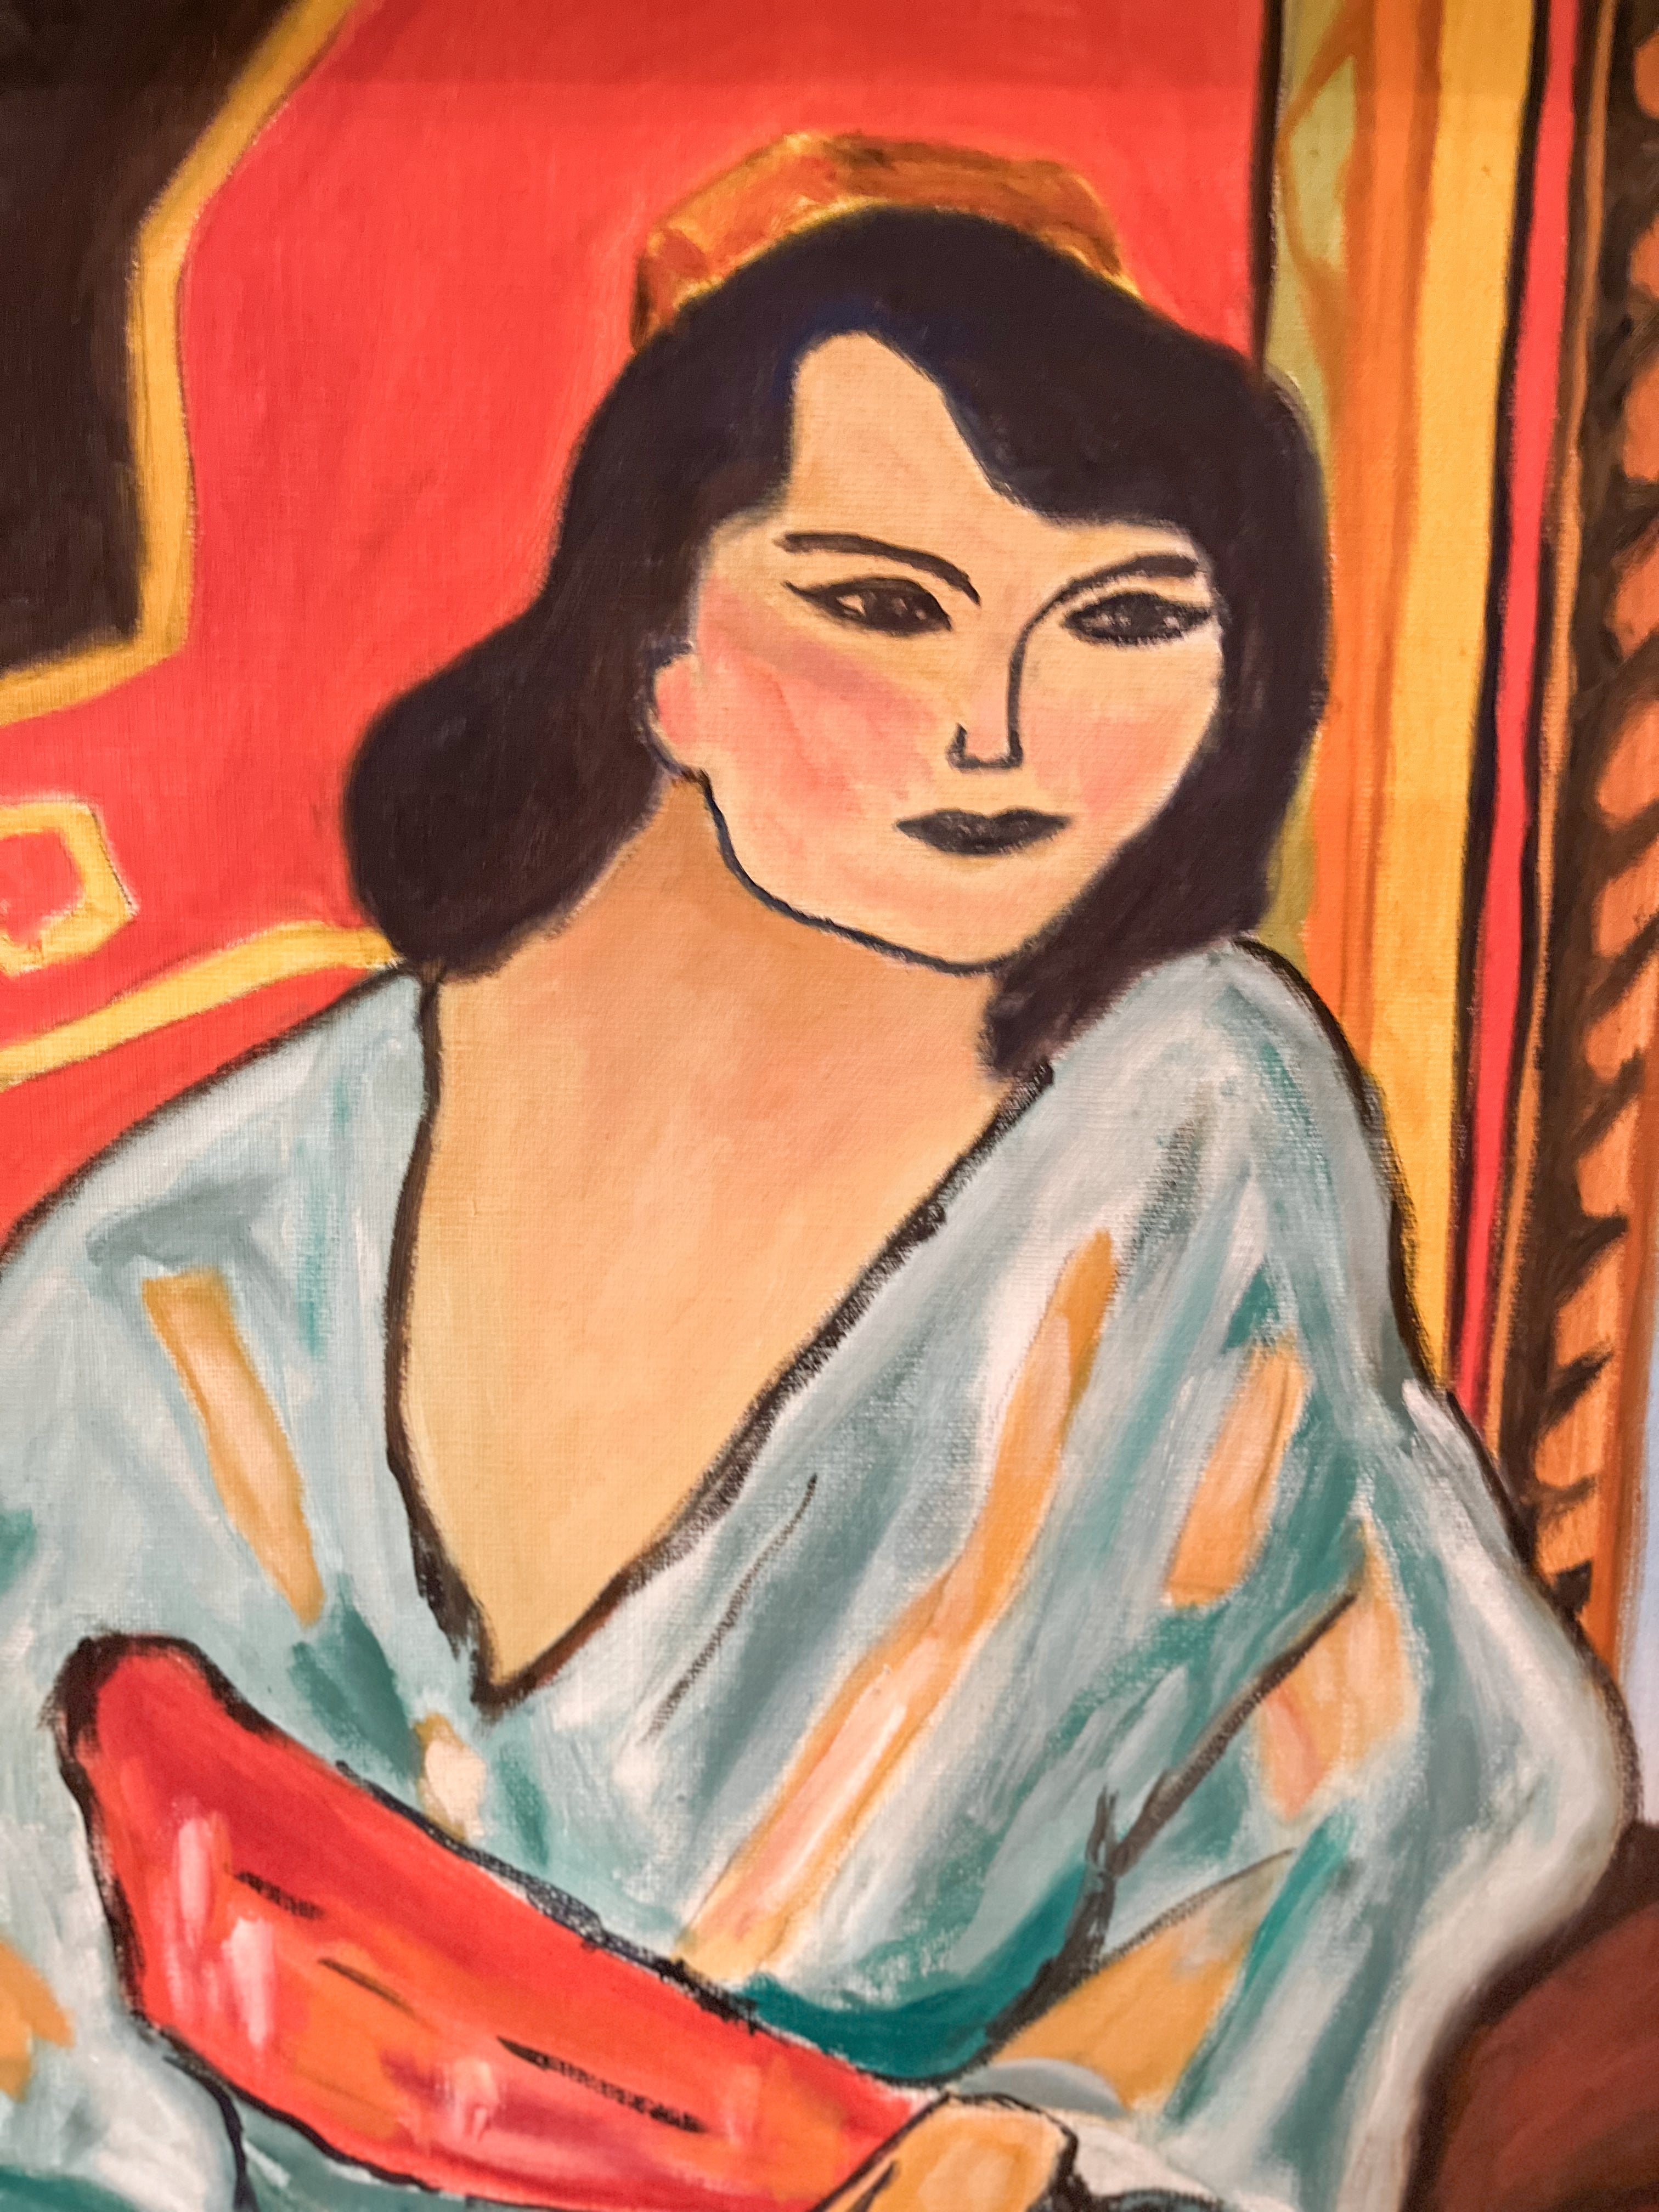 Hand Painted Reproduction of Matisse’s “The Algerian Woman,” 17.5”x22”